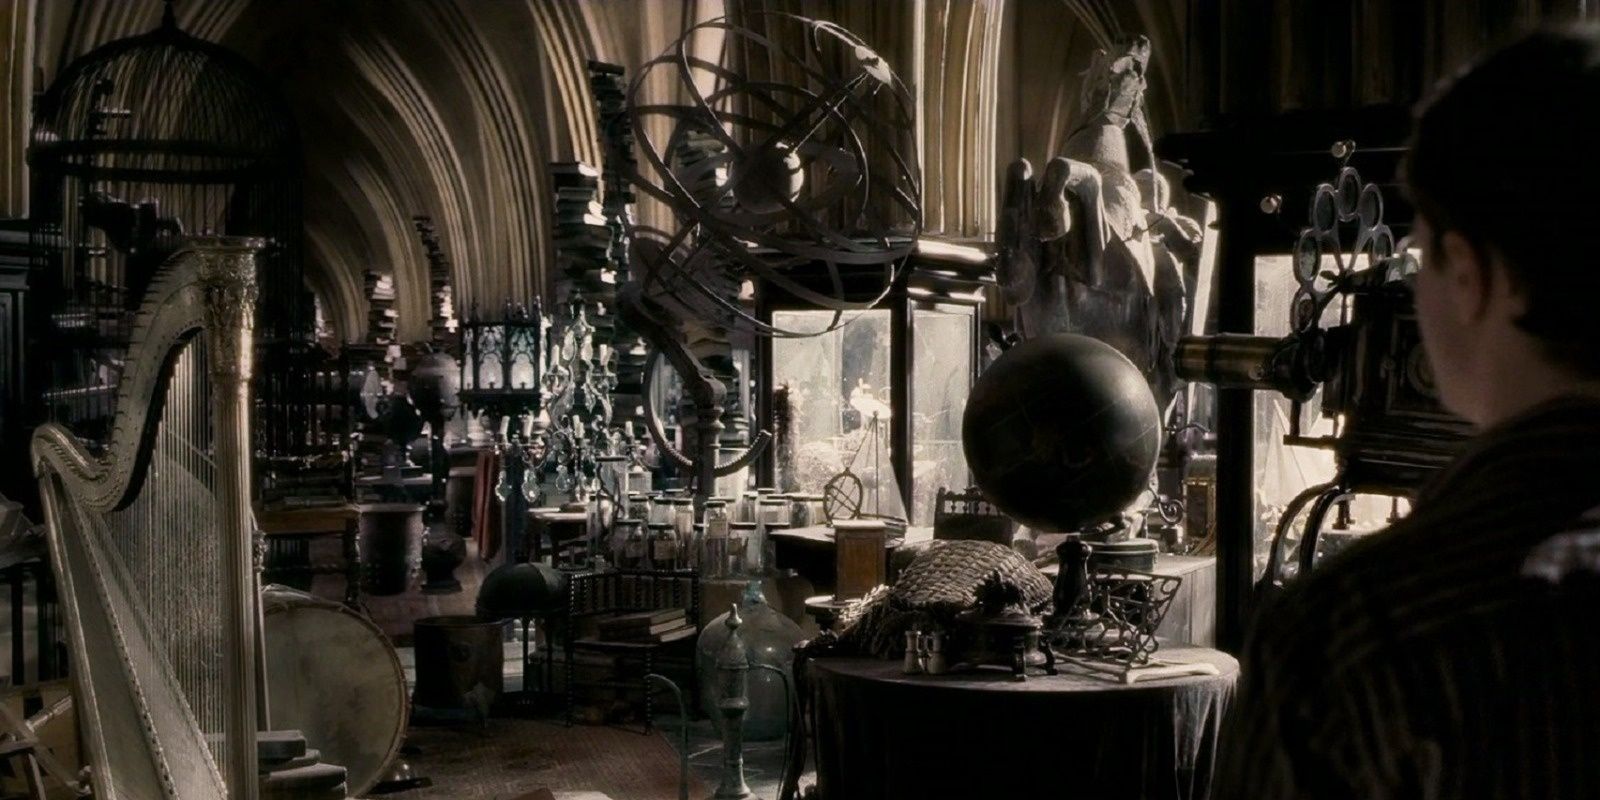 The Room of Requirement om Harry Potter